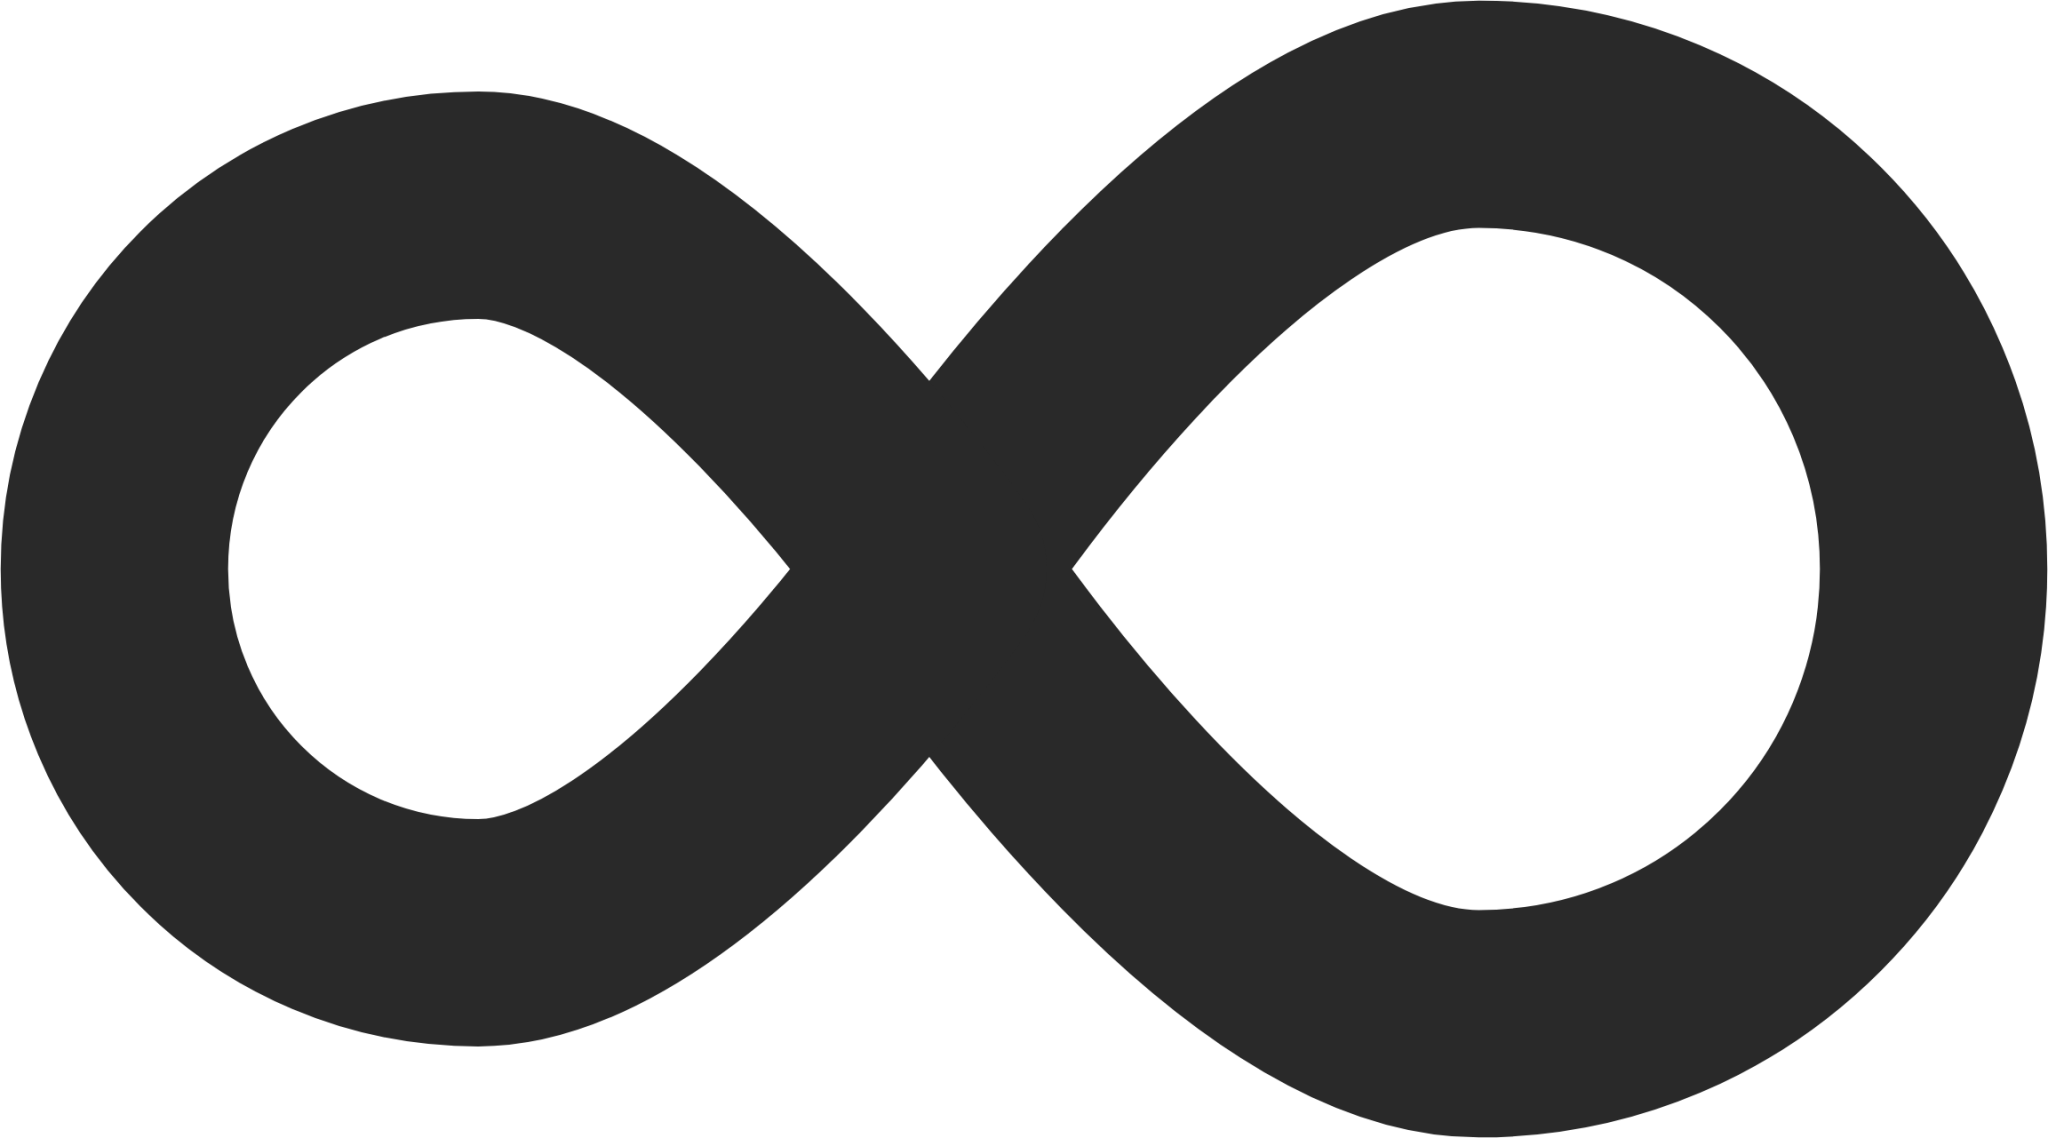 sign lemniscate icon